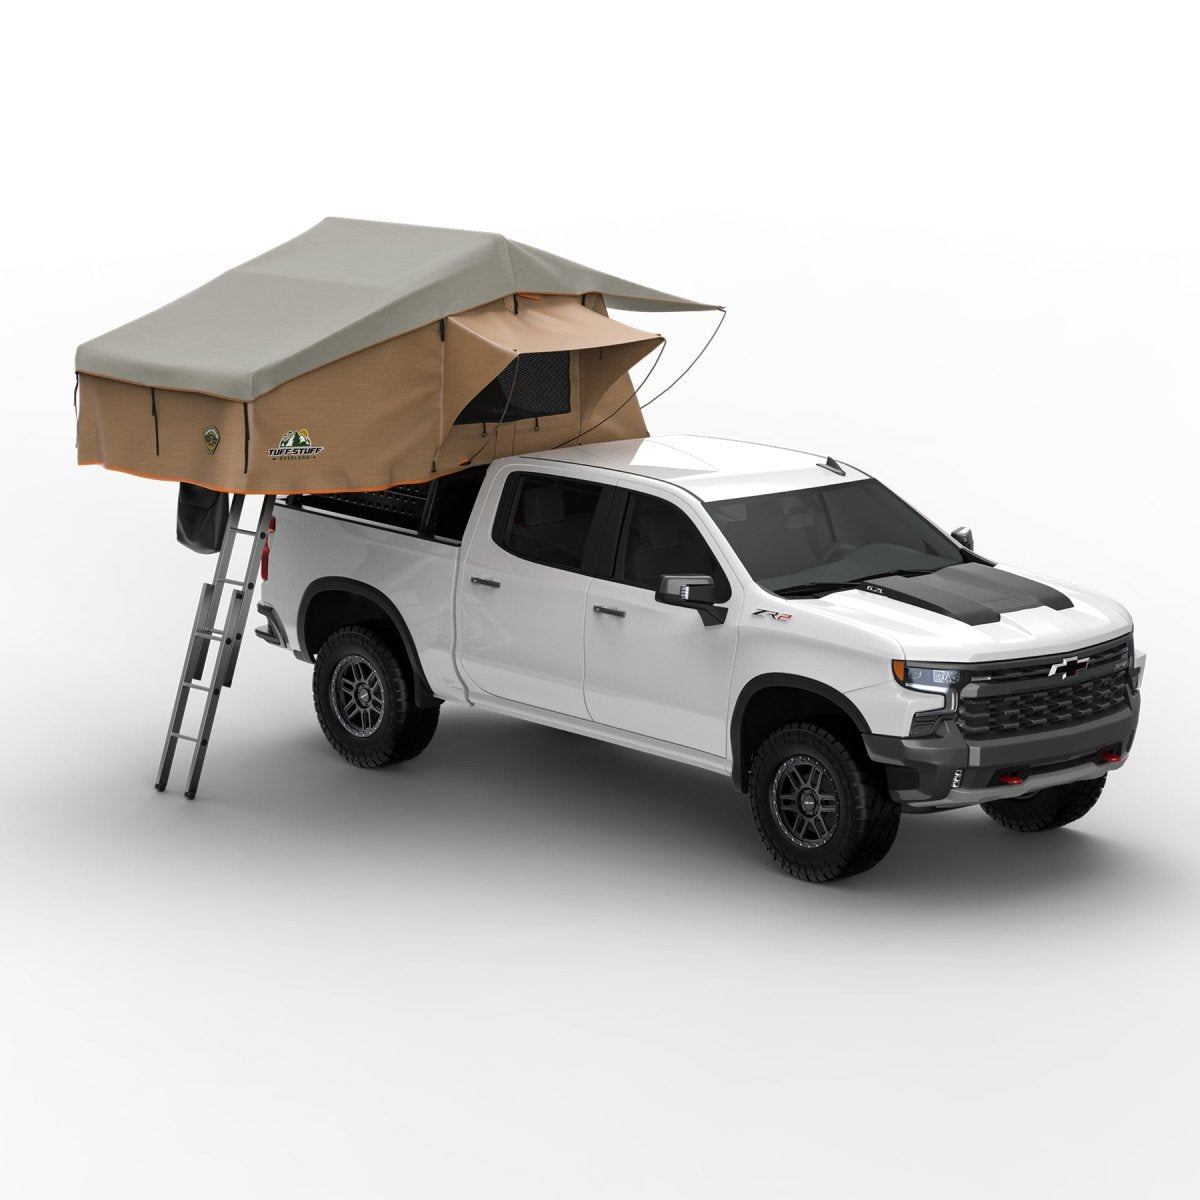 Tuff Stuff Overland 3-Person Ranger 65 Roof Top Tent